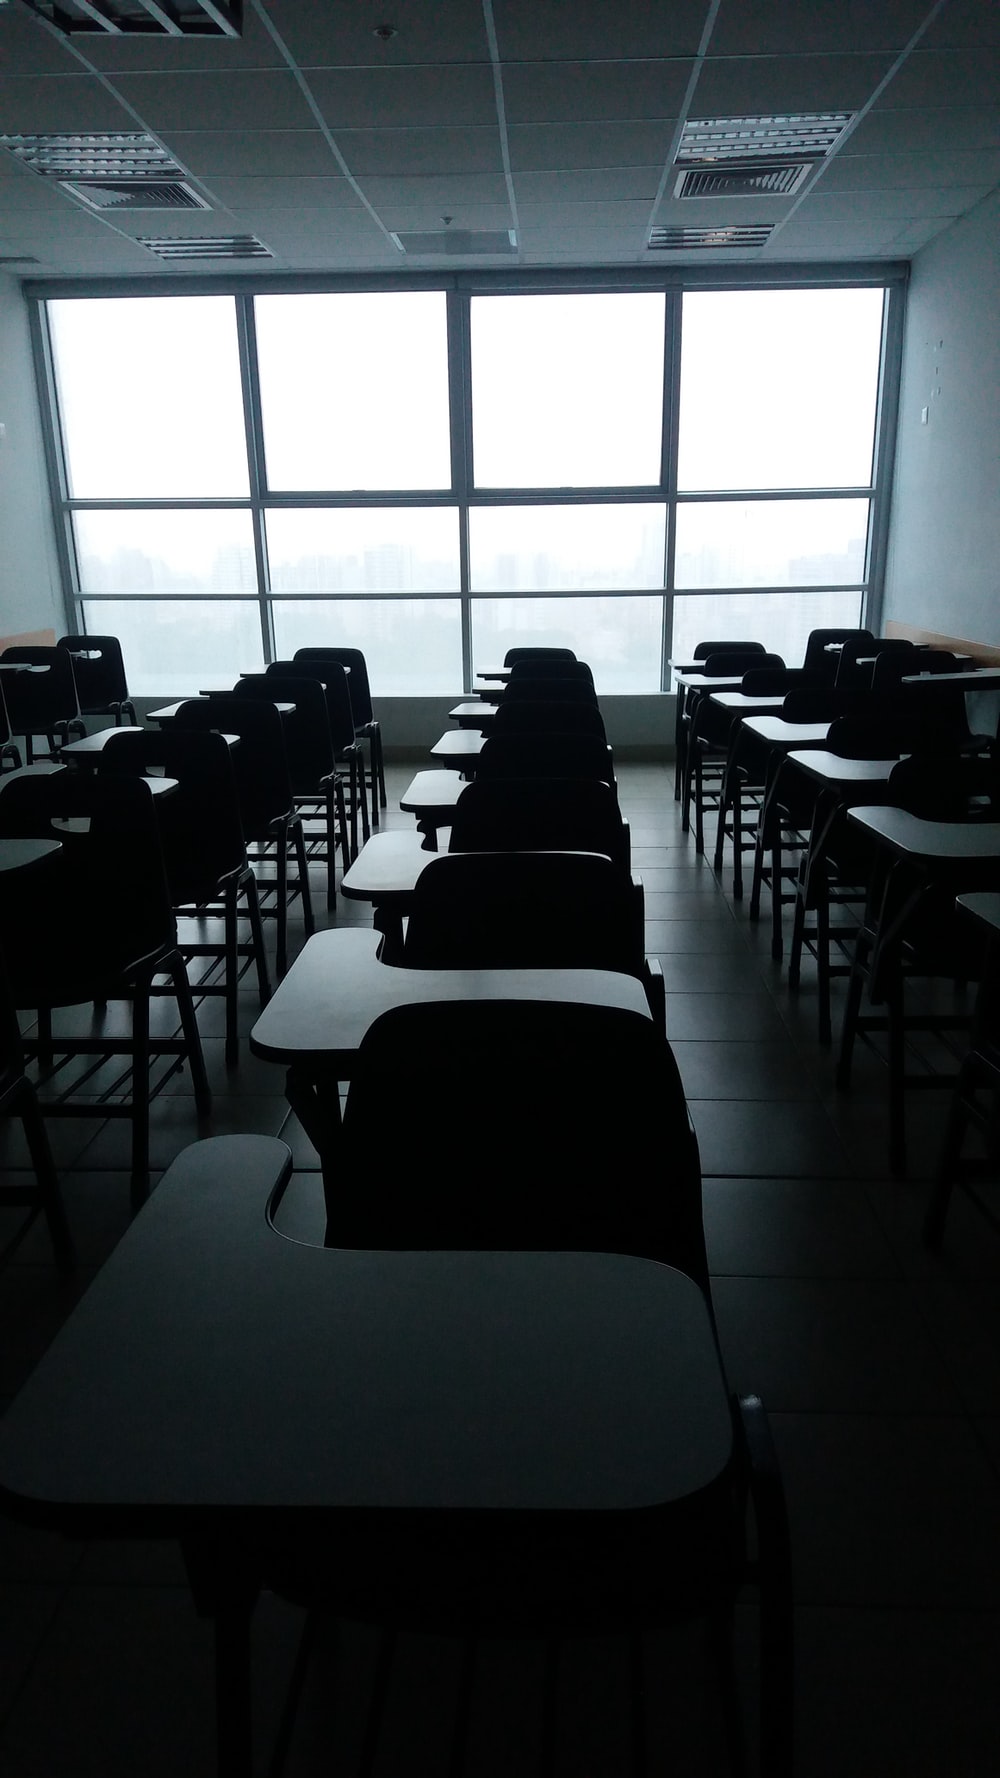 Empty Classroom Picture. Download Free Image